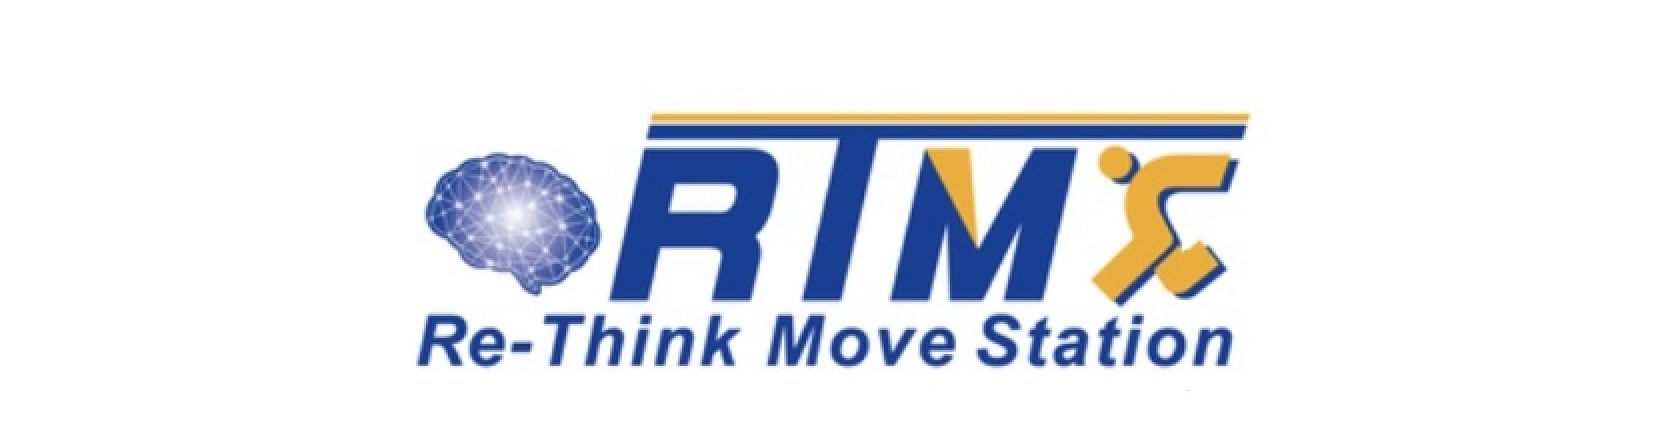 Re-Think Move Station